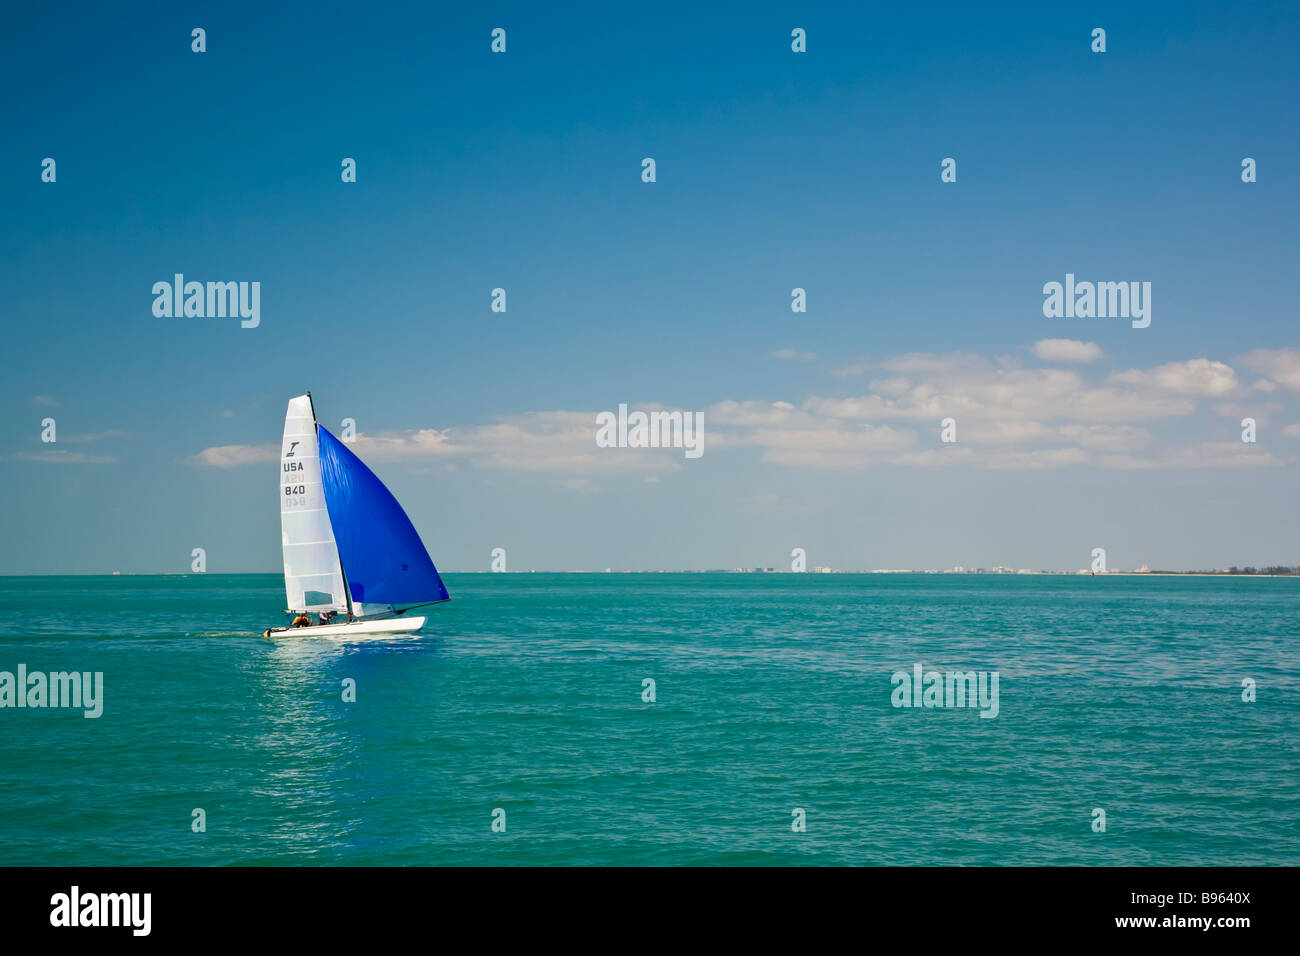 Sailboat in Gulf of Mexico in entrance to Tampa Bay from Gulf of Mexico Stock Photo